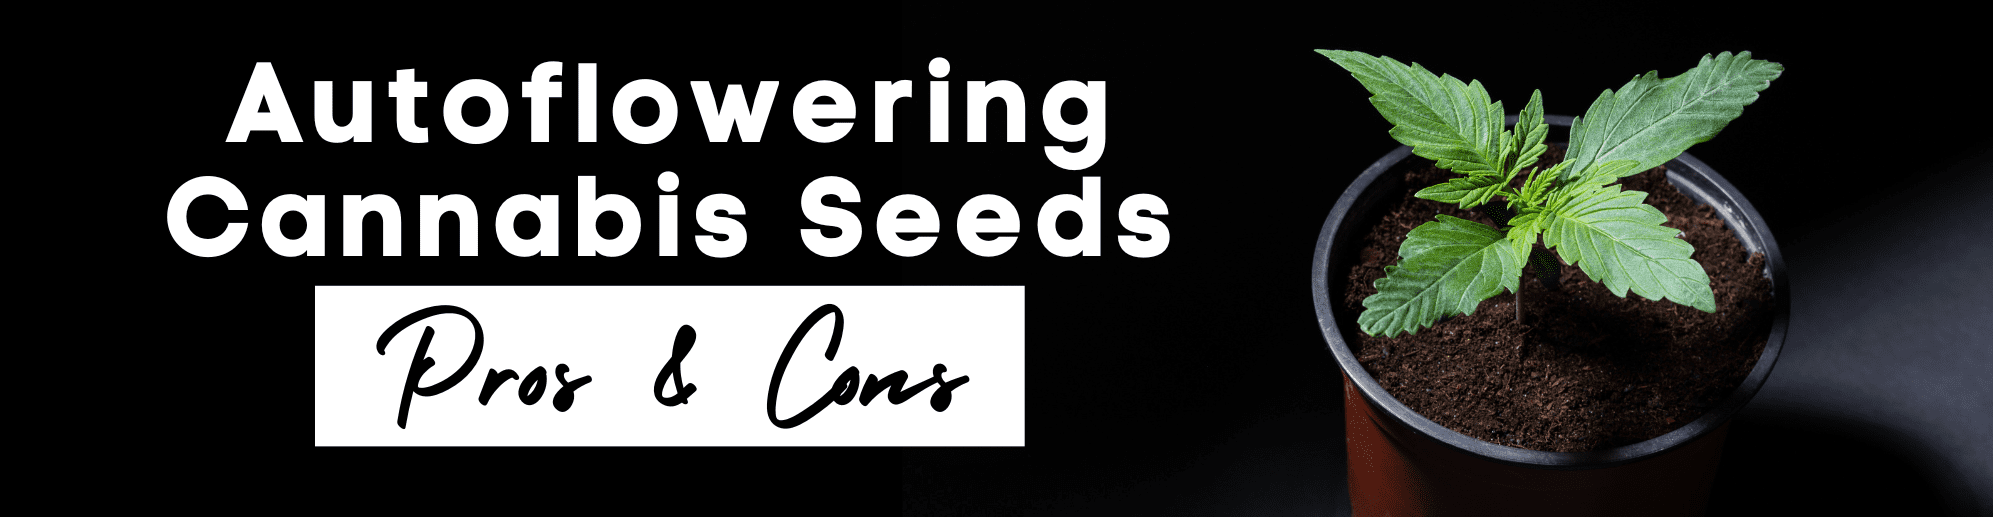 Pros and Cons of Autoflowering Cannabis